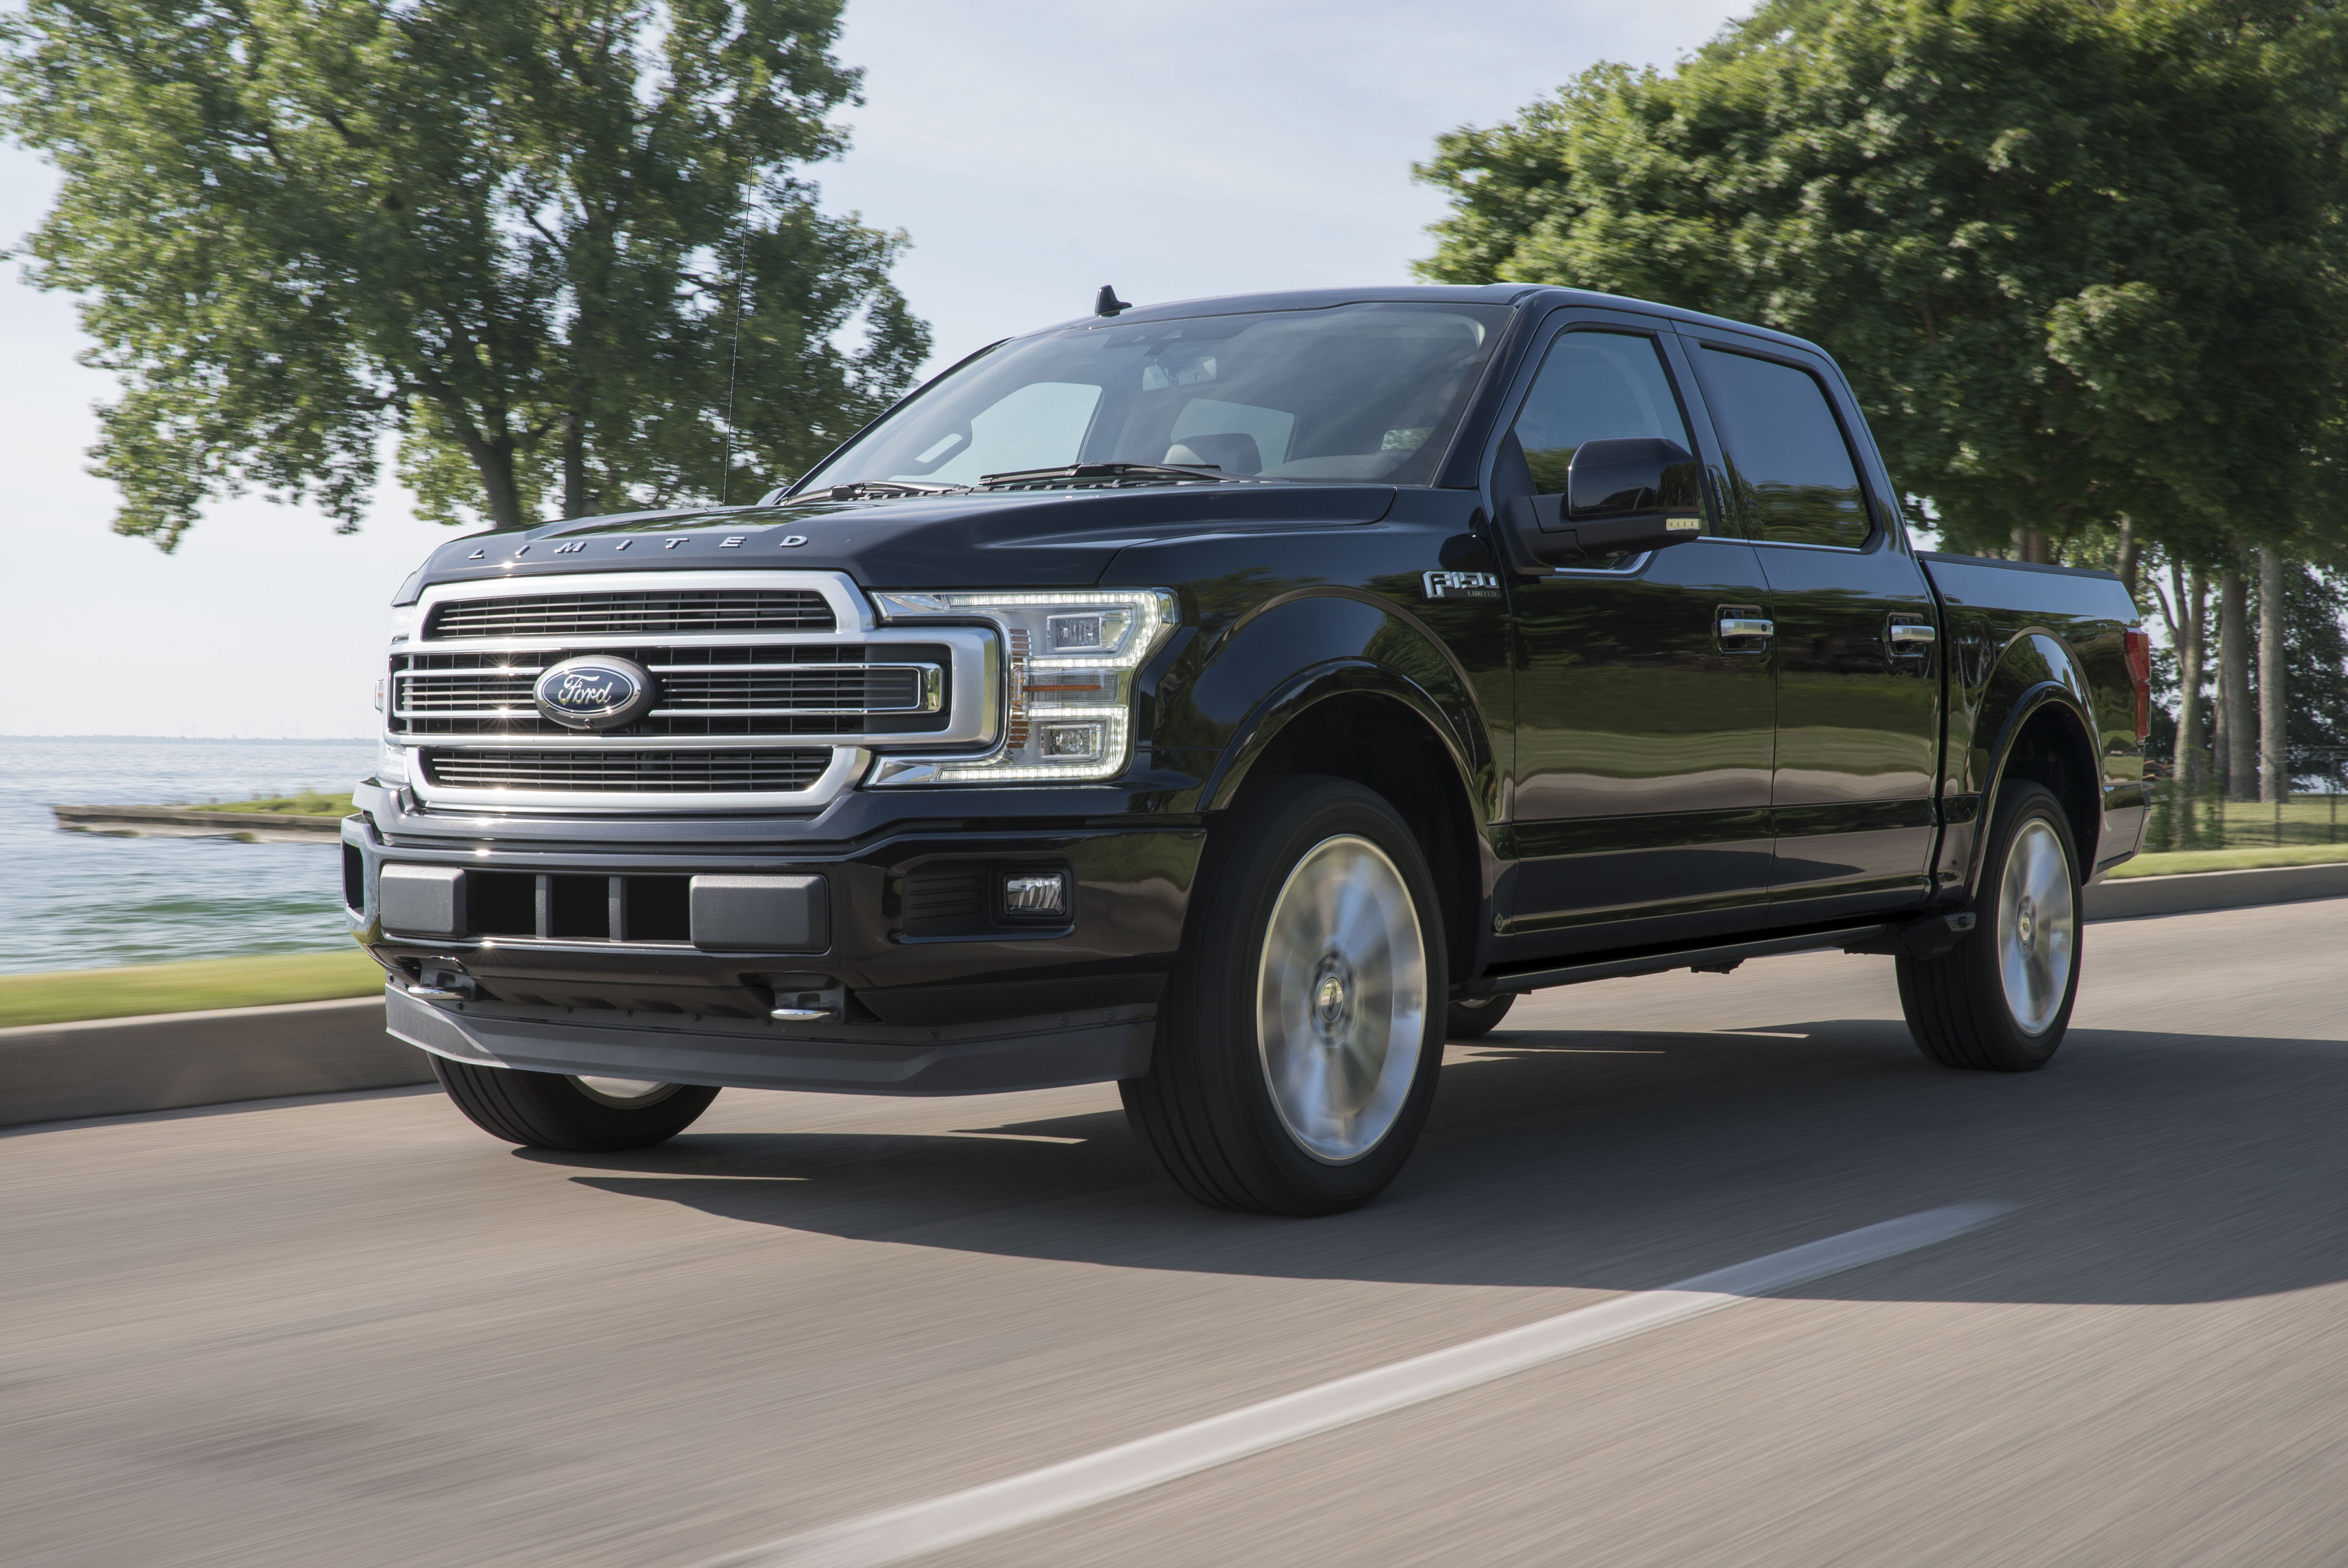 19 F 150 Limited Gains High Output Ecoboost V6 Making It The Most Powerful Advanced And Luxurious F 150 Ever Ford Media Center